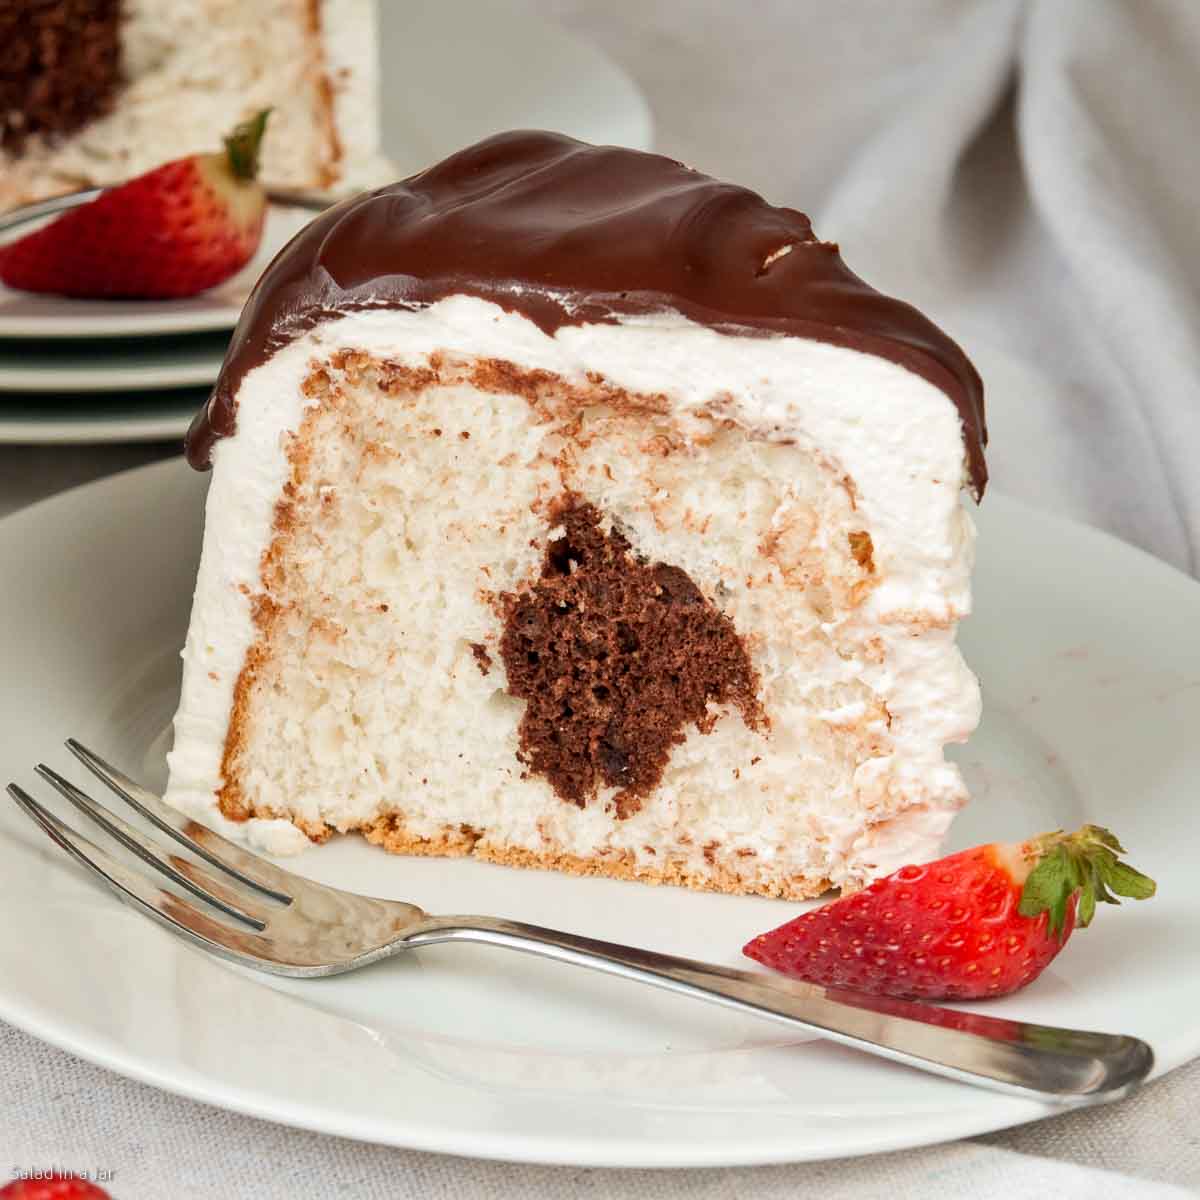 slice of cake showing the chocolate in the middle with a strawberry on the side.